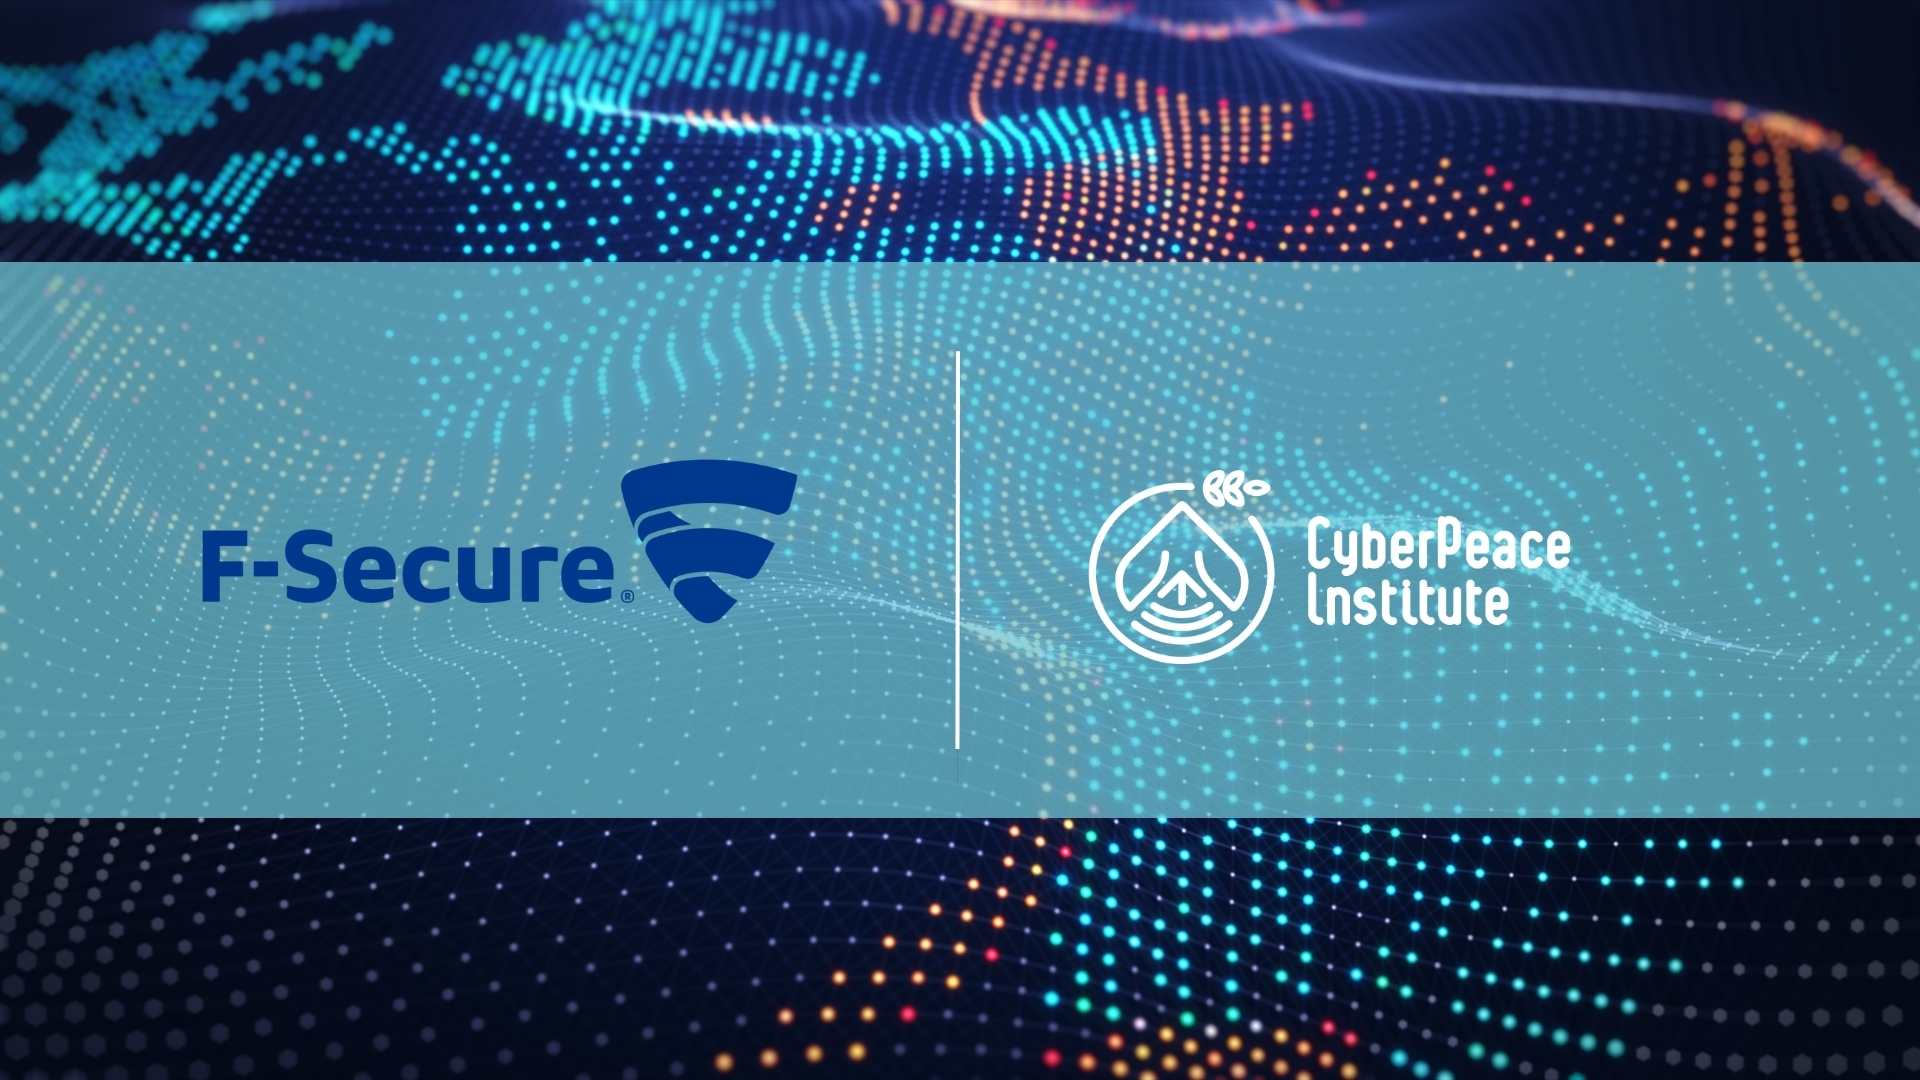 F-Secure, CyberPeace Institute team up to counter attacks against vulnerable communities